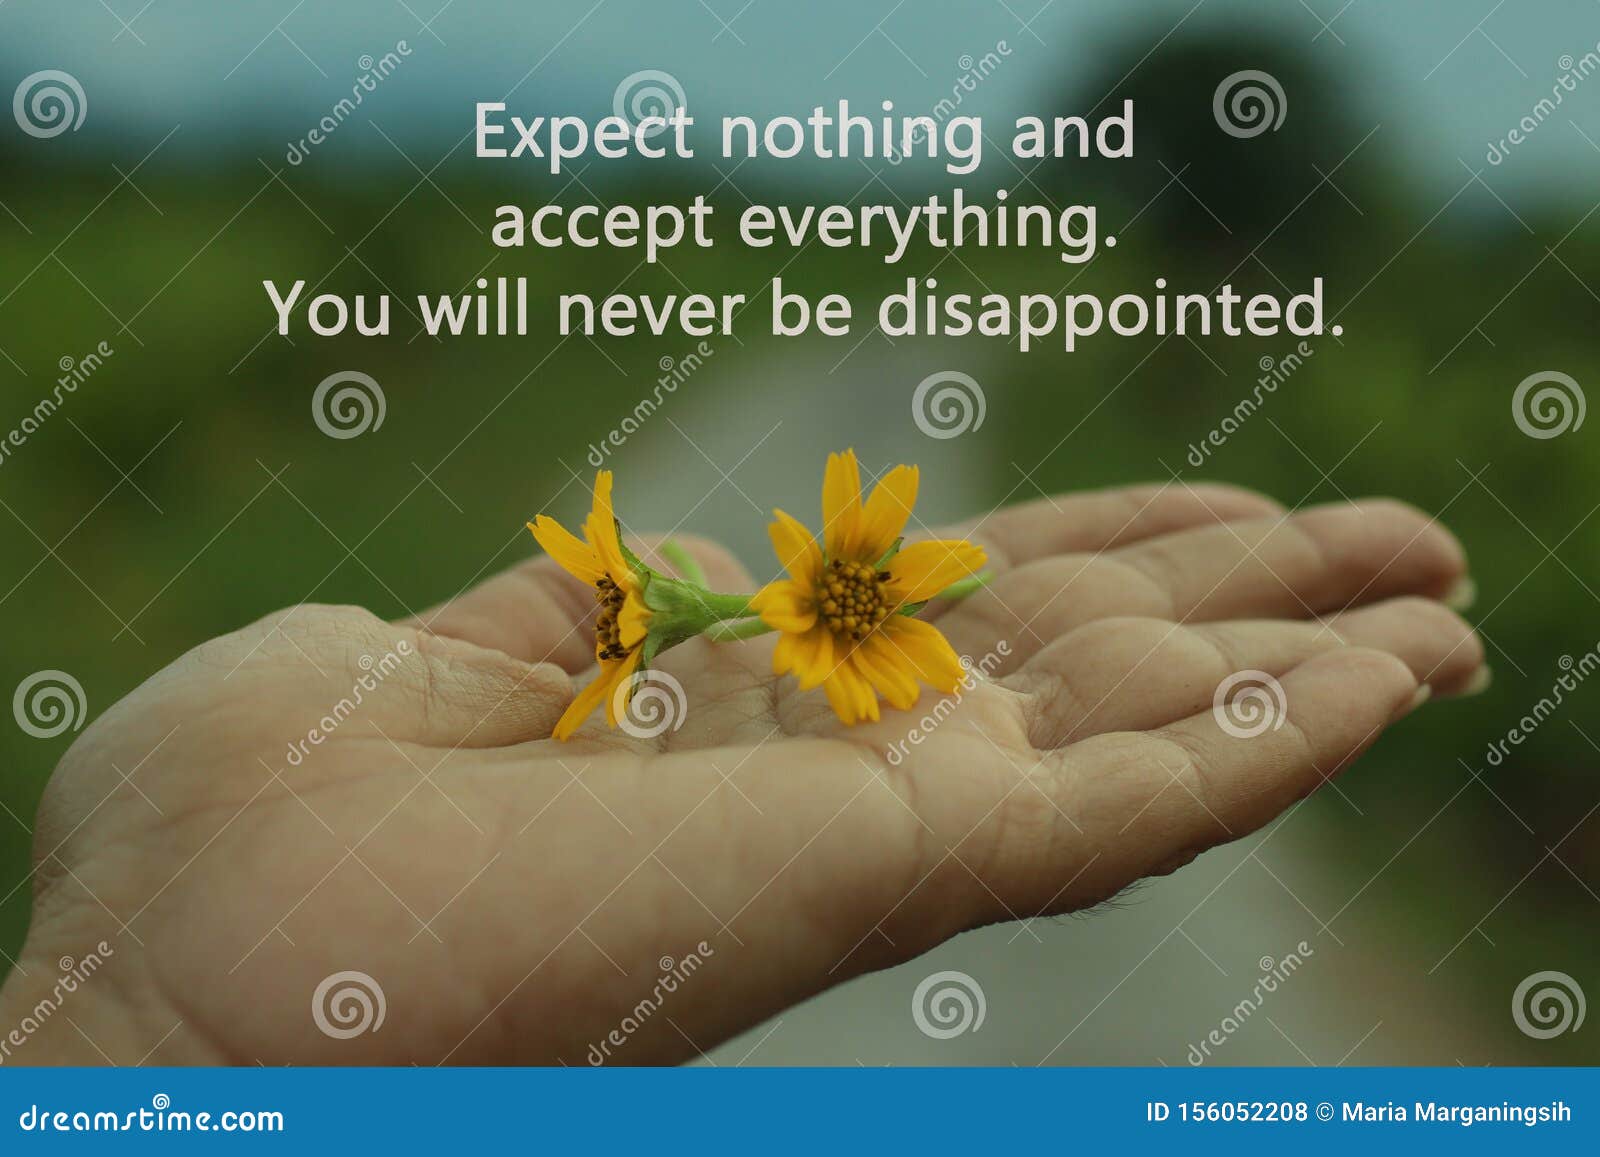 Inspirational Words Expect Nothing Appreciate Anything You Will Never Be Disappointed With Two Little Daisy Flowers In Hand Stock Photo Image Of Blessings Girl